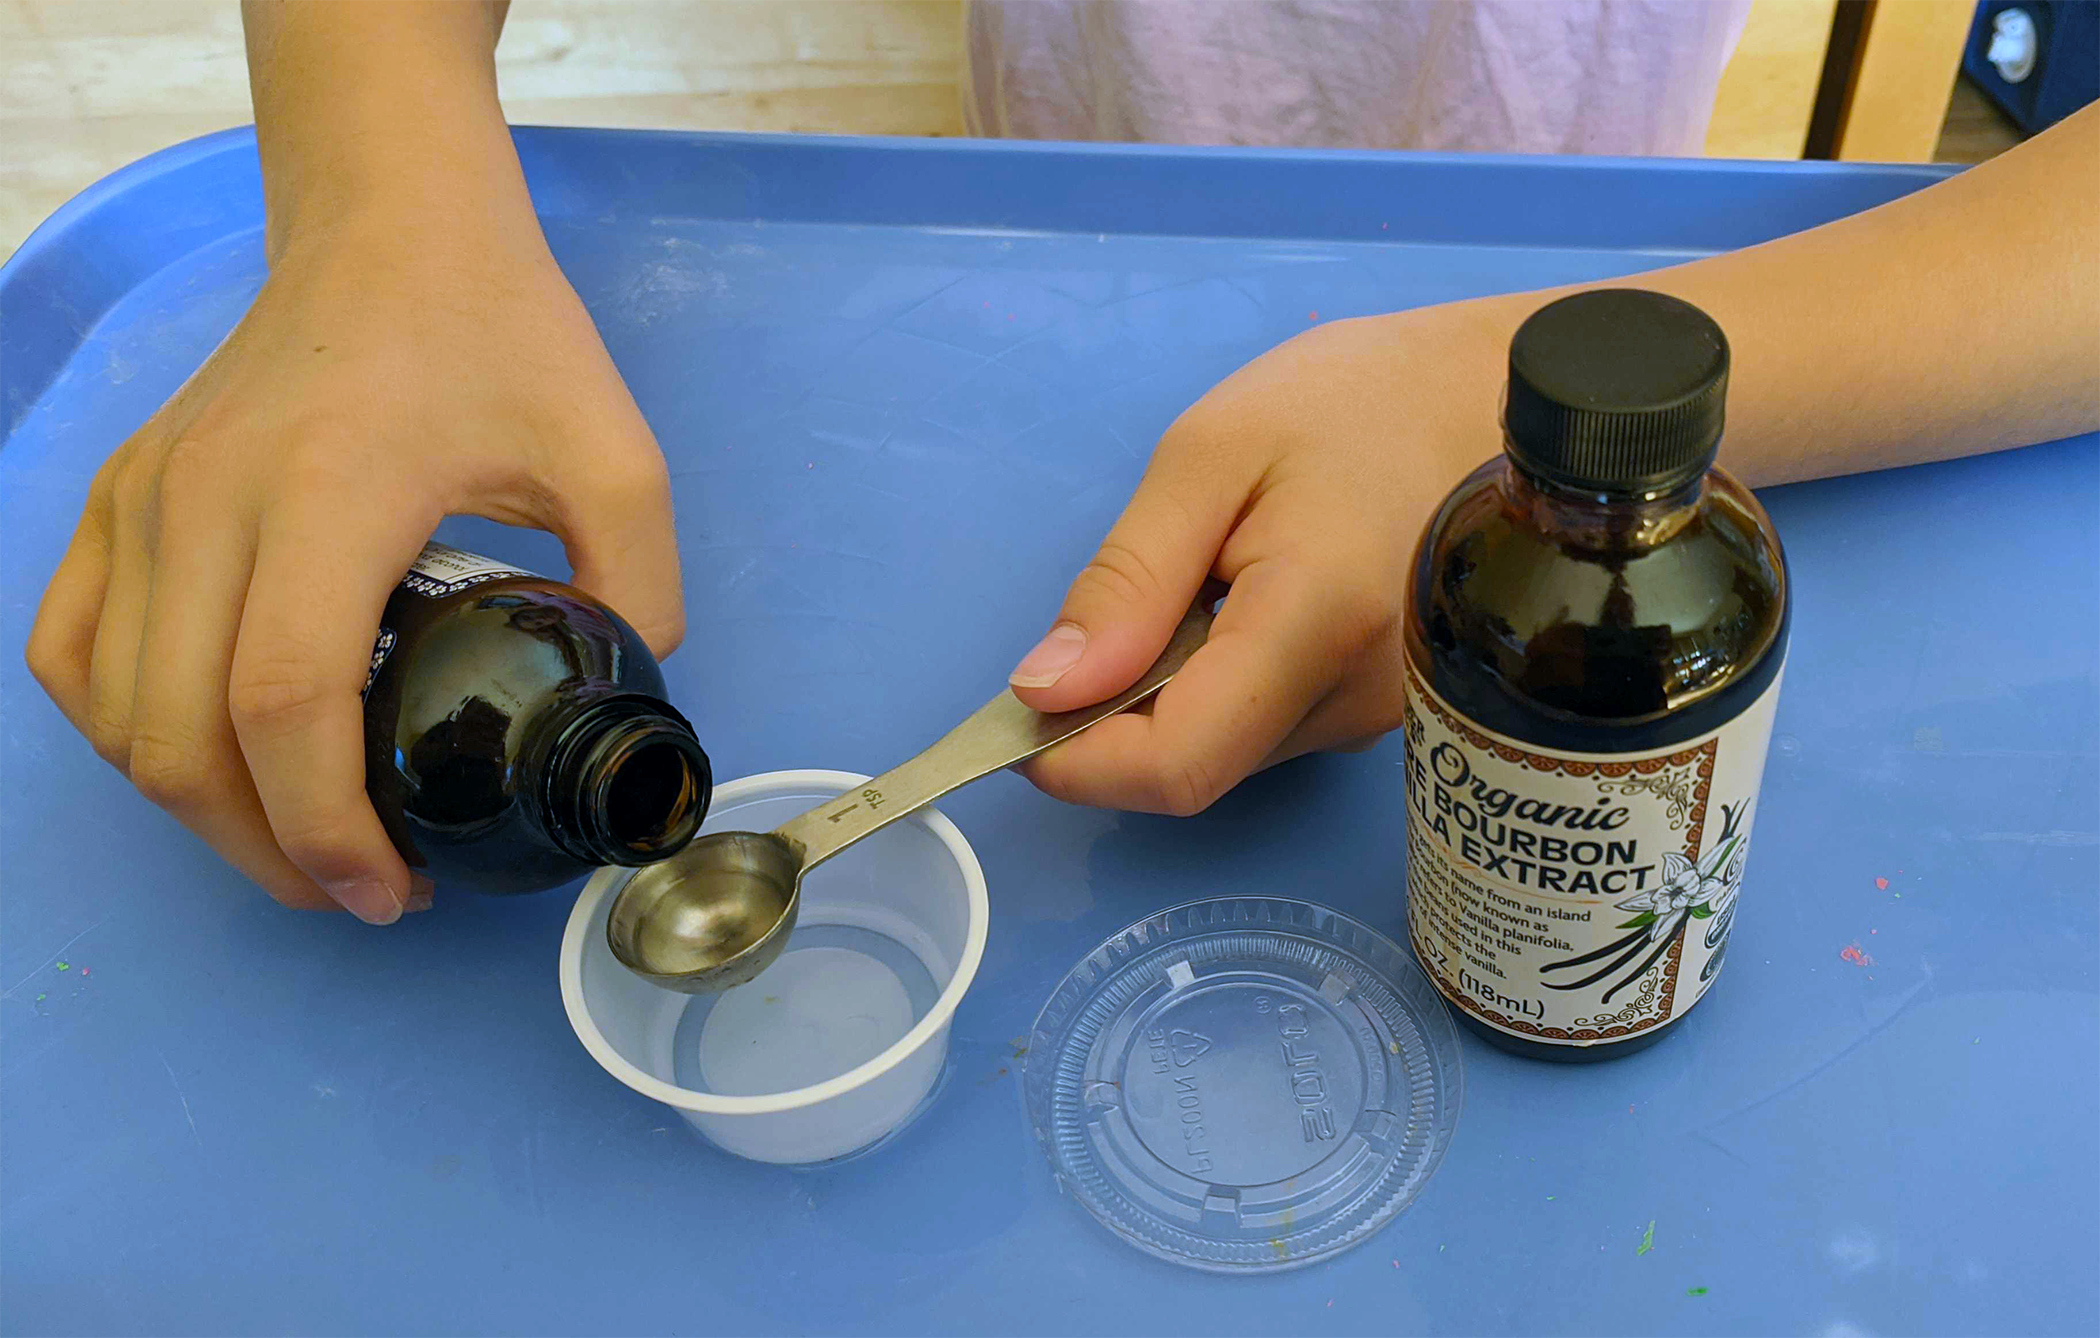 Student measuring vanilla and pouring it into a small plastic cup for an odor memory smell test